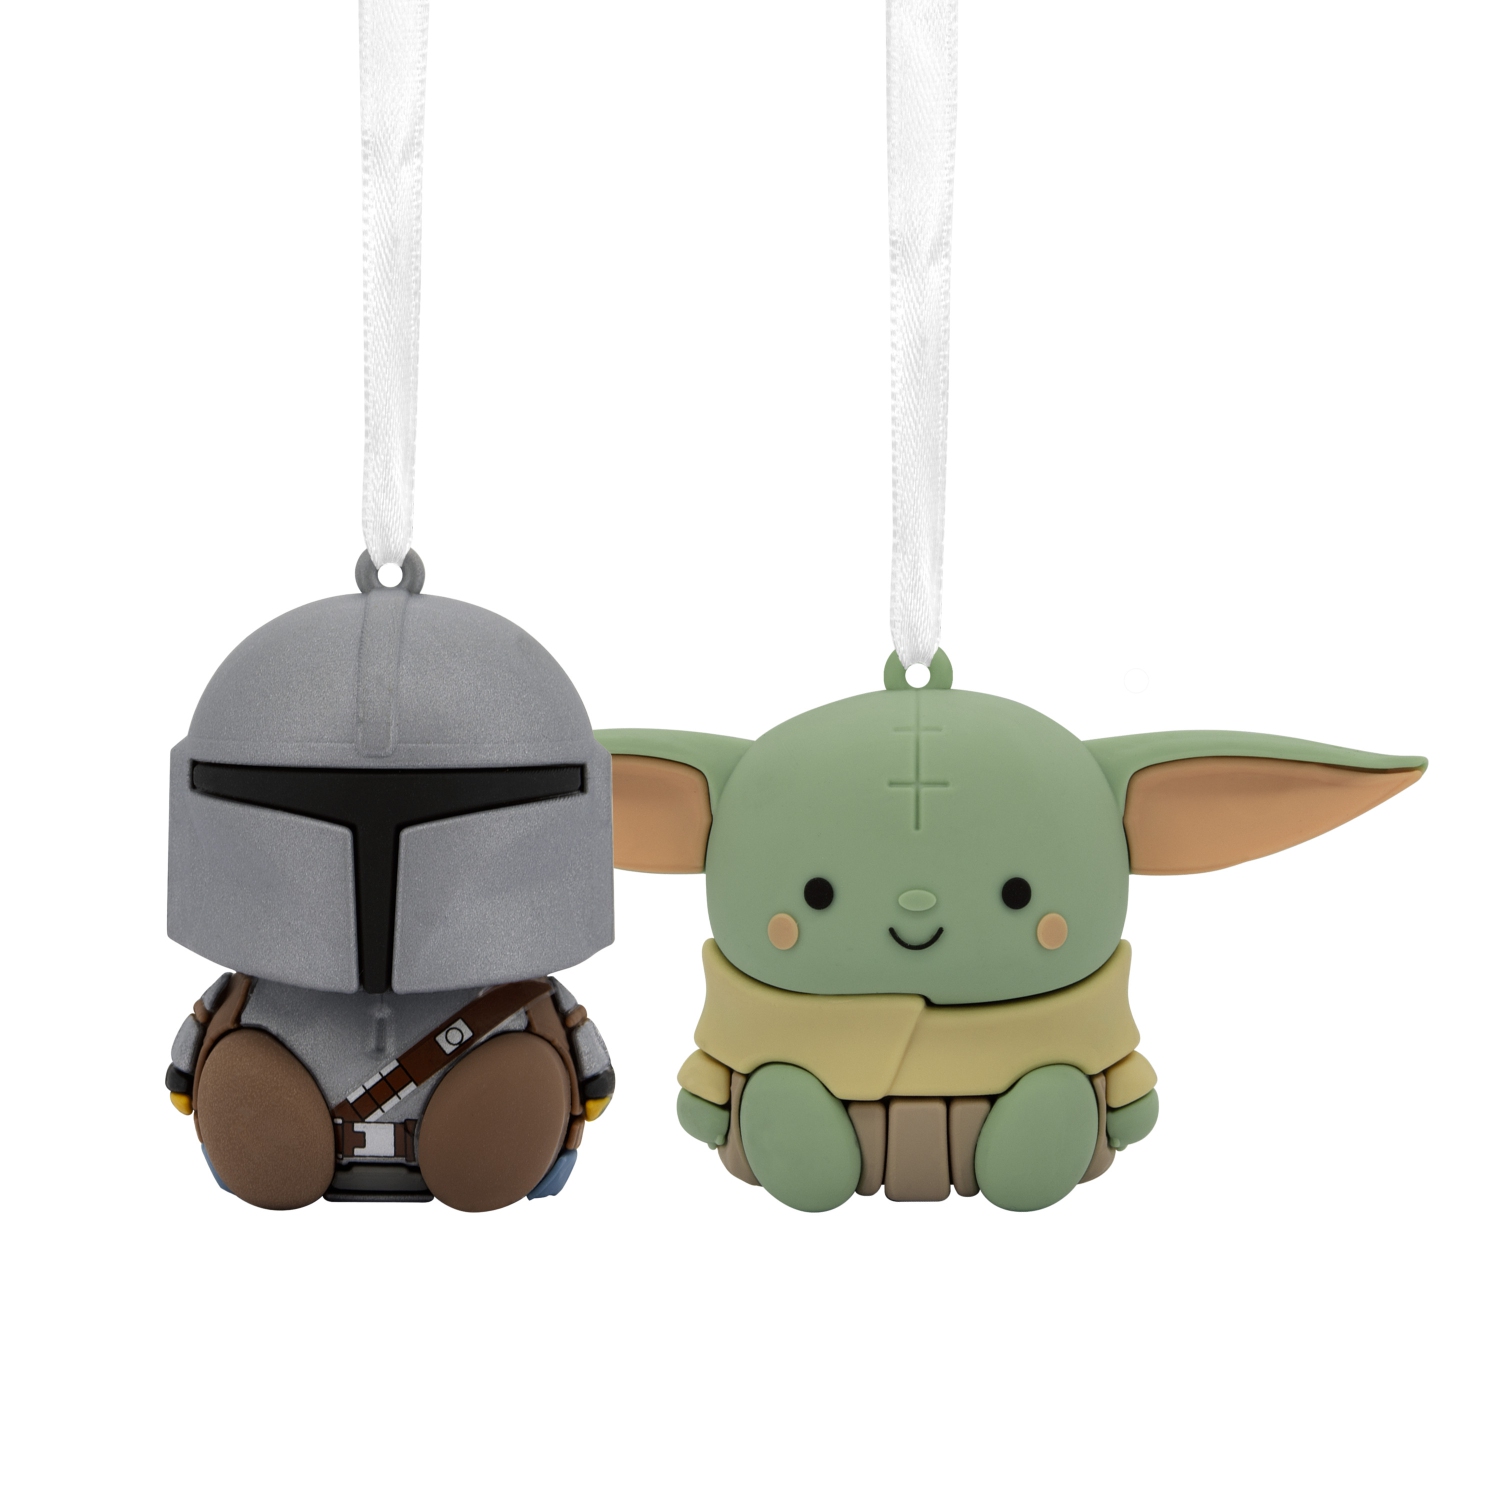 Hallmark Christmas Ornaments (Better Together Star Wars: The Mandalorian and Grogu Magnetic), Set of 2